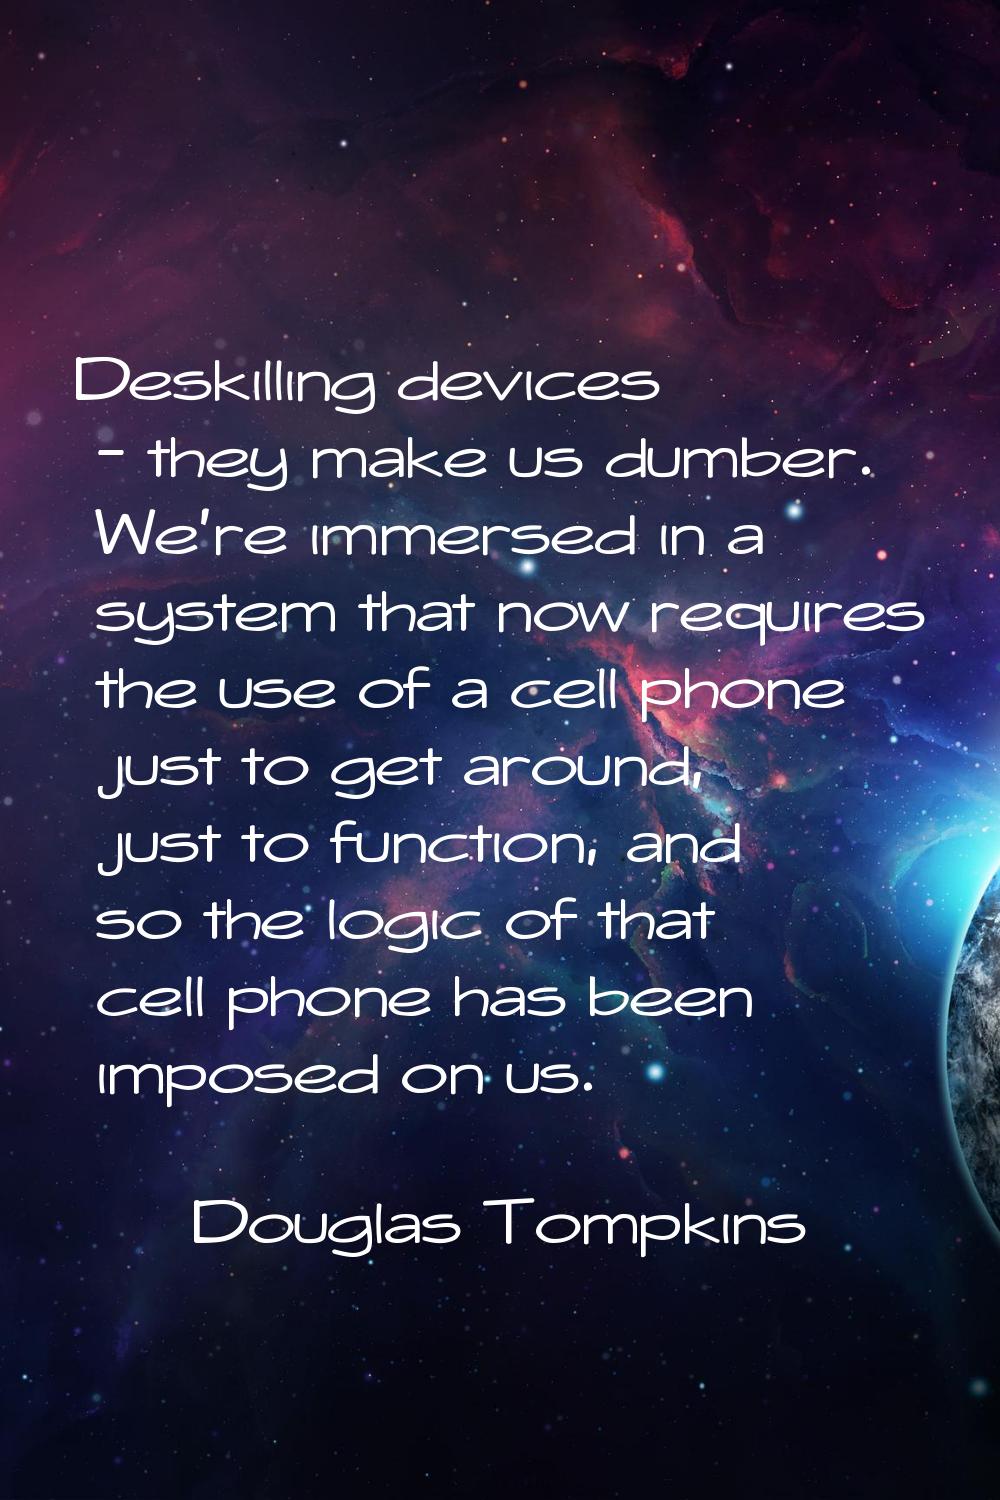 Deskilling devices - they make us dumber. We're immersed in a system that now requires the use of a